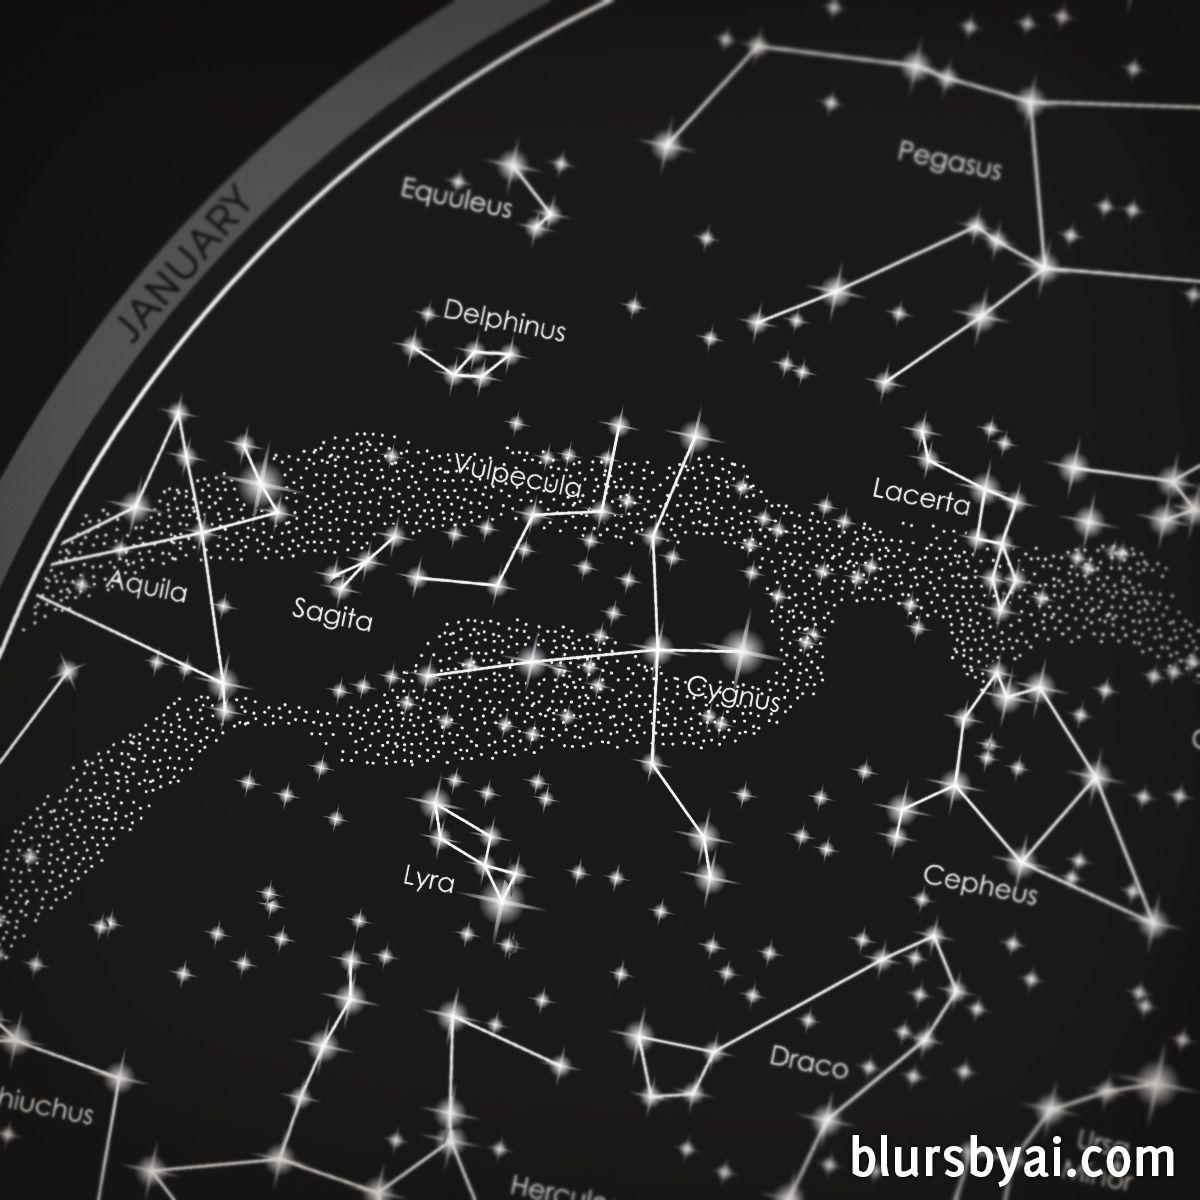 Maps of the sky with constellations